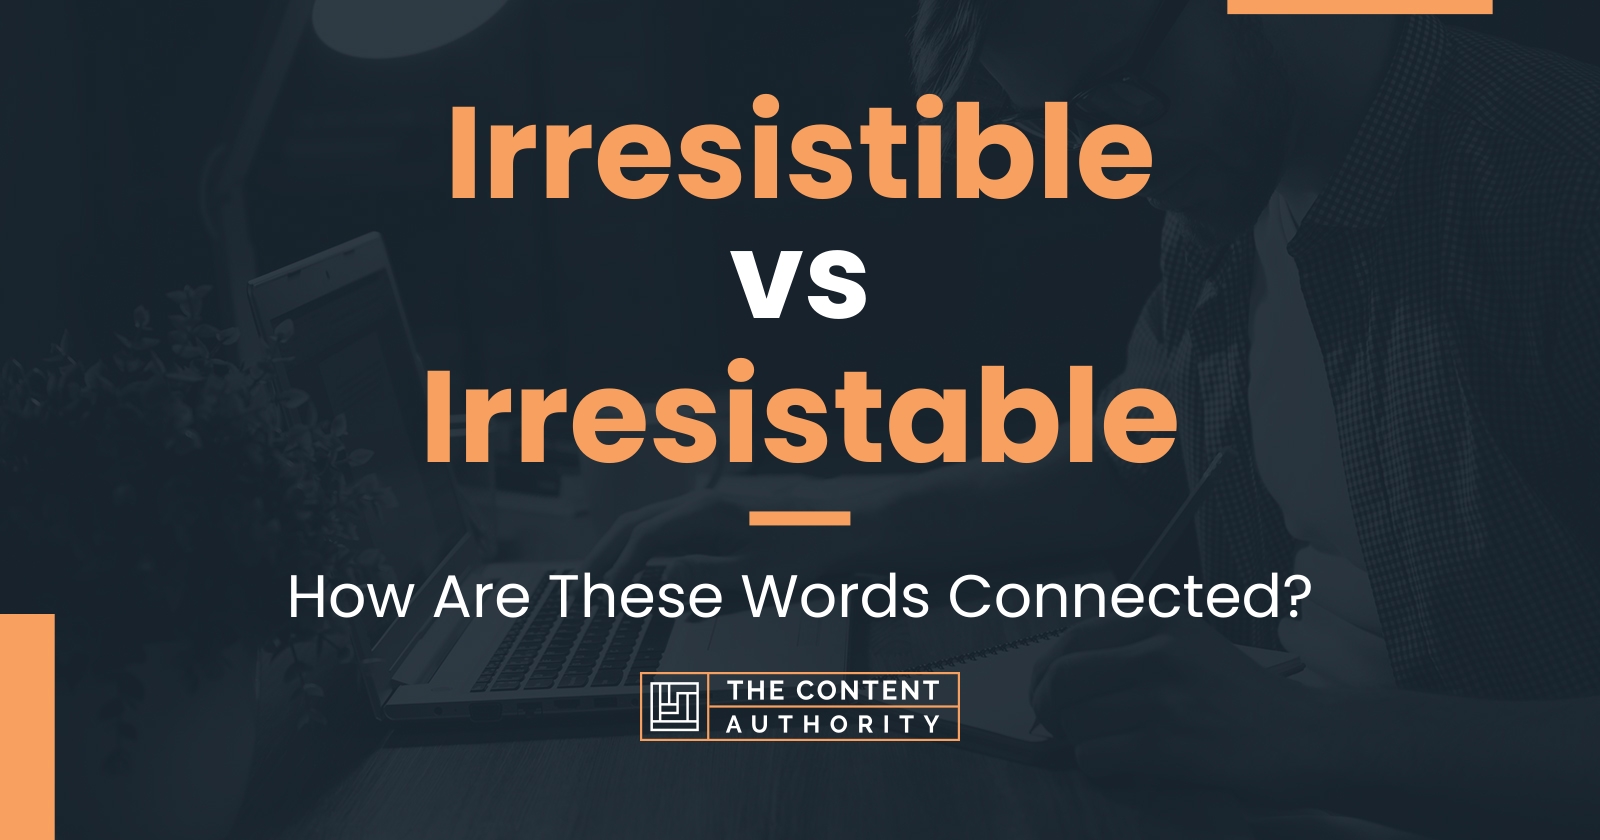 Irresistible vs Irresistable: How Are These Words Connected?